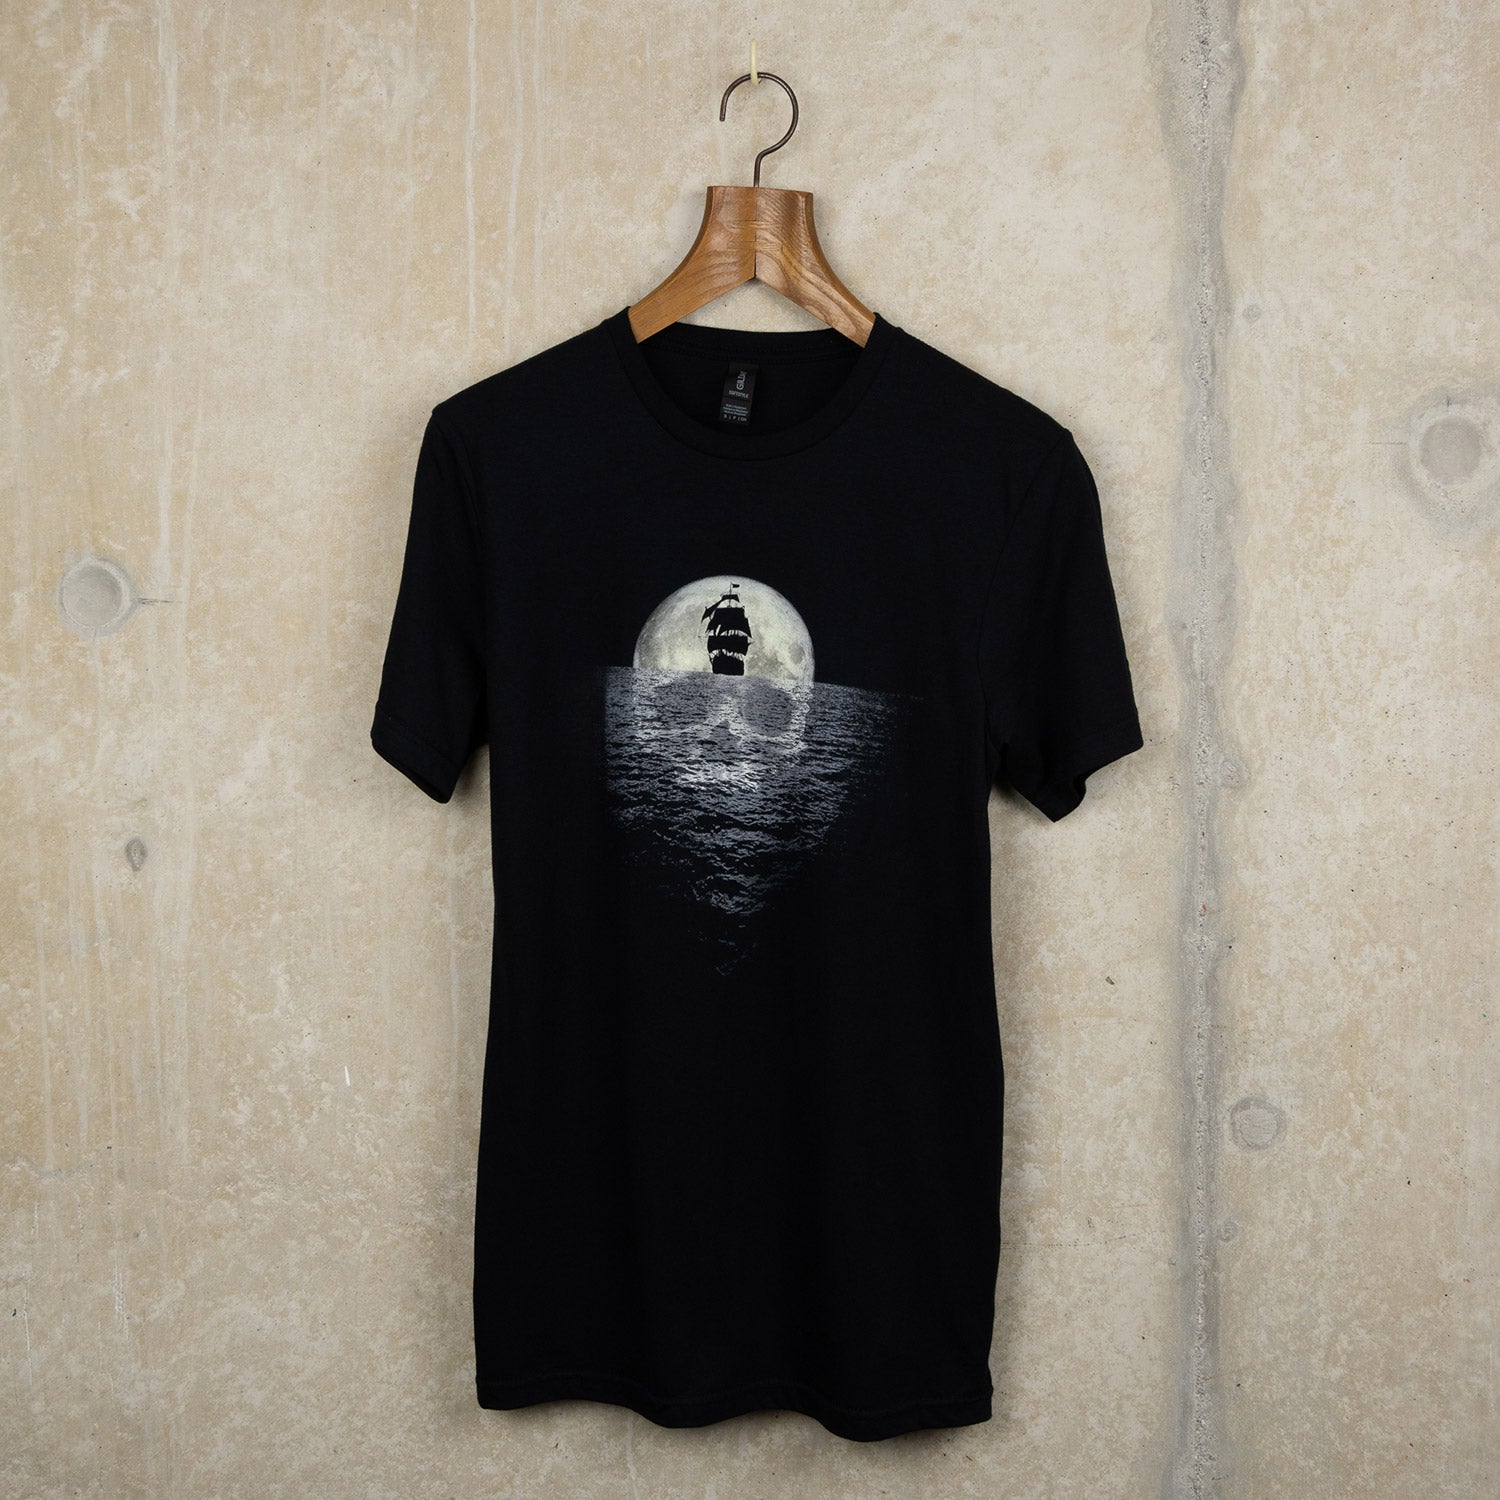 Black t-shirt with pirate exhibition artwork of a sailing ship sailing away from a full moon reflecting a skull in the sea